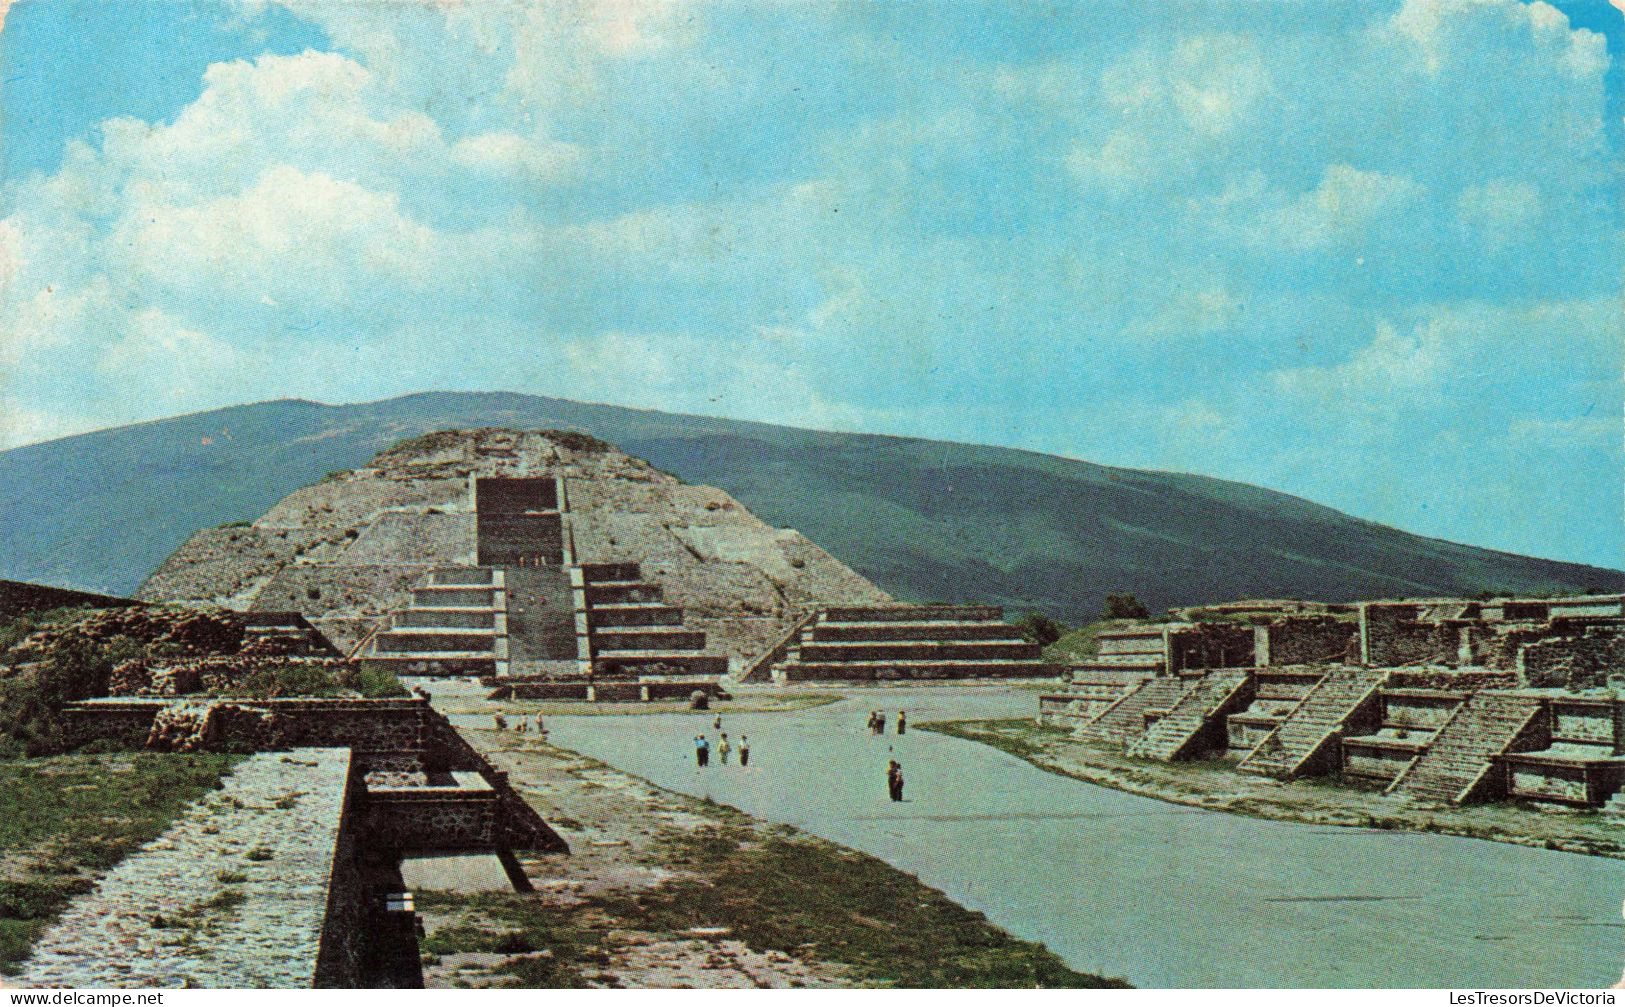 MEXICO - The Moon Pyramid At The Back - Colorisé - Carte Postale Ancienne - Messico